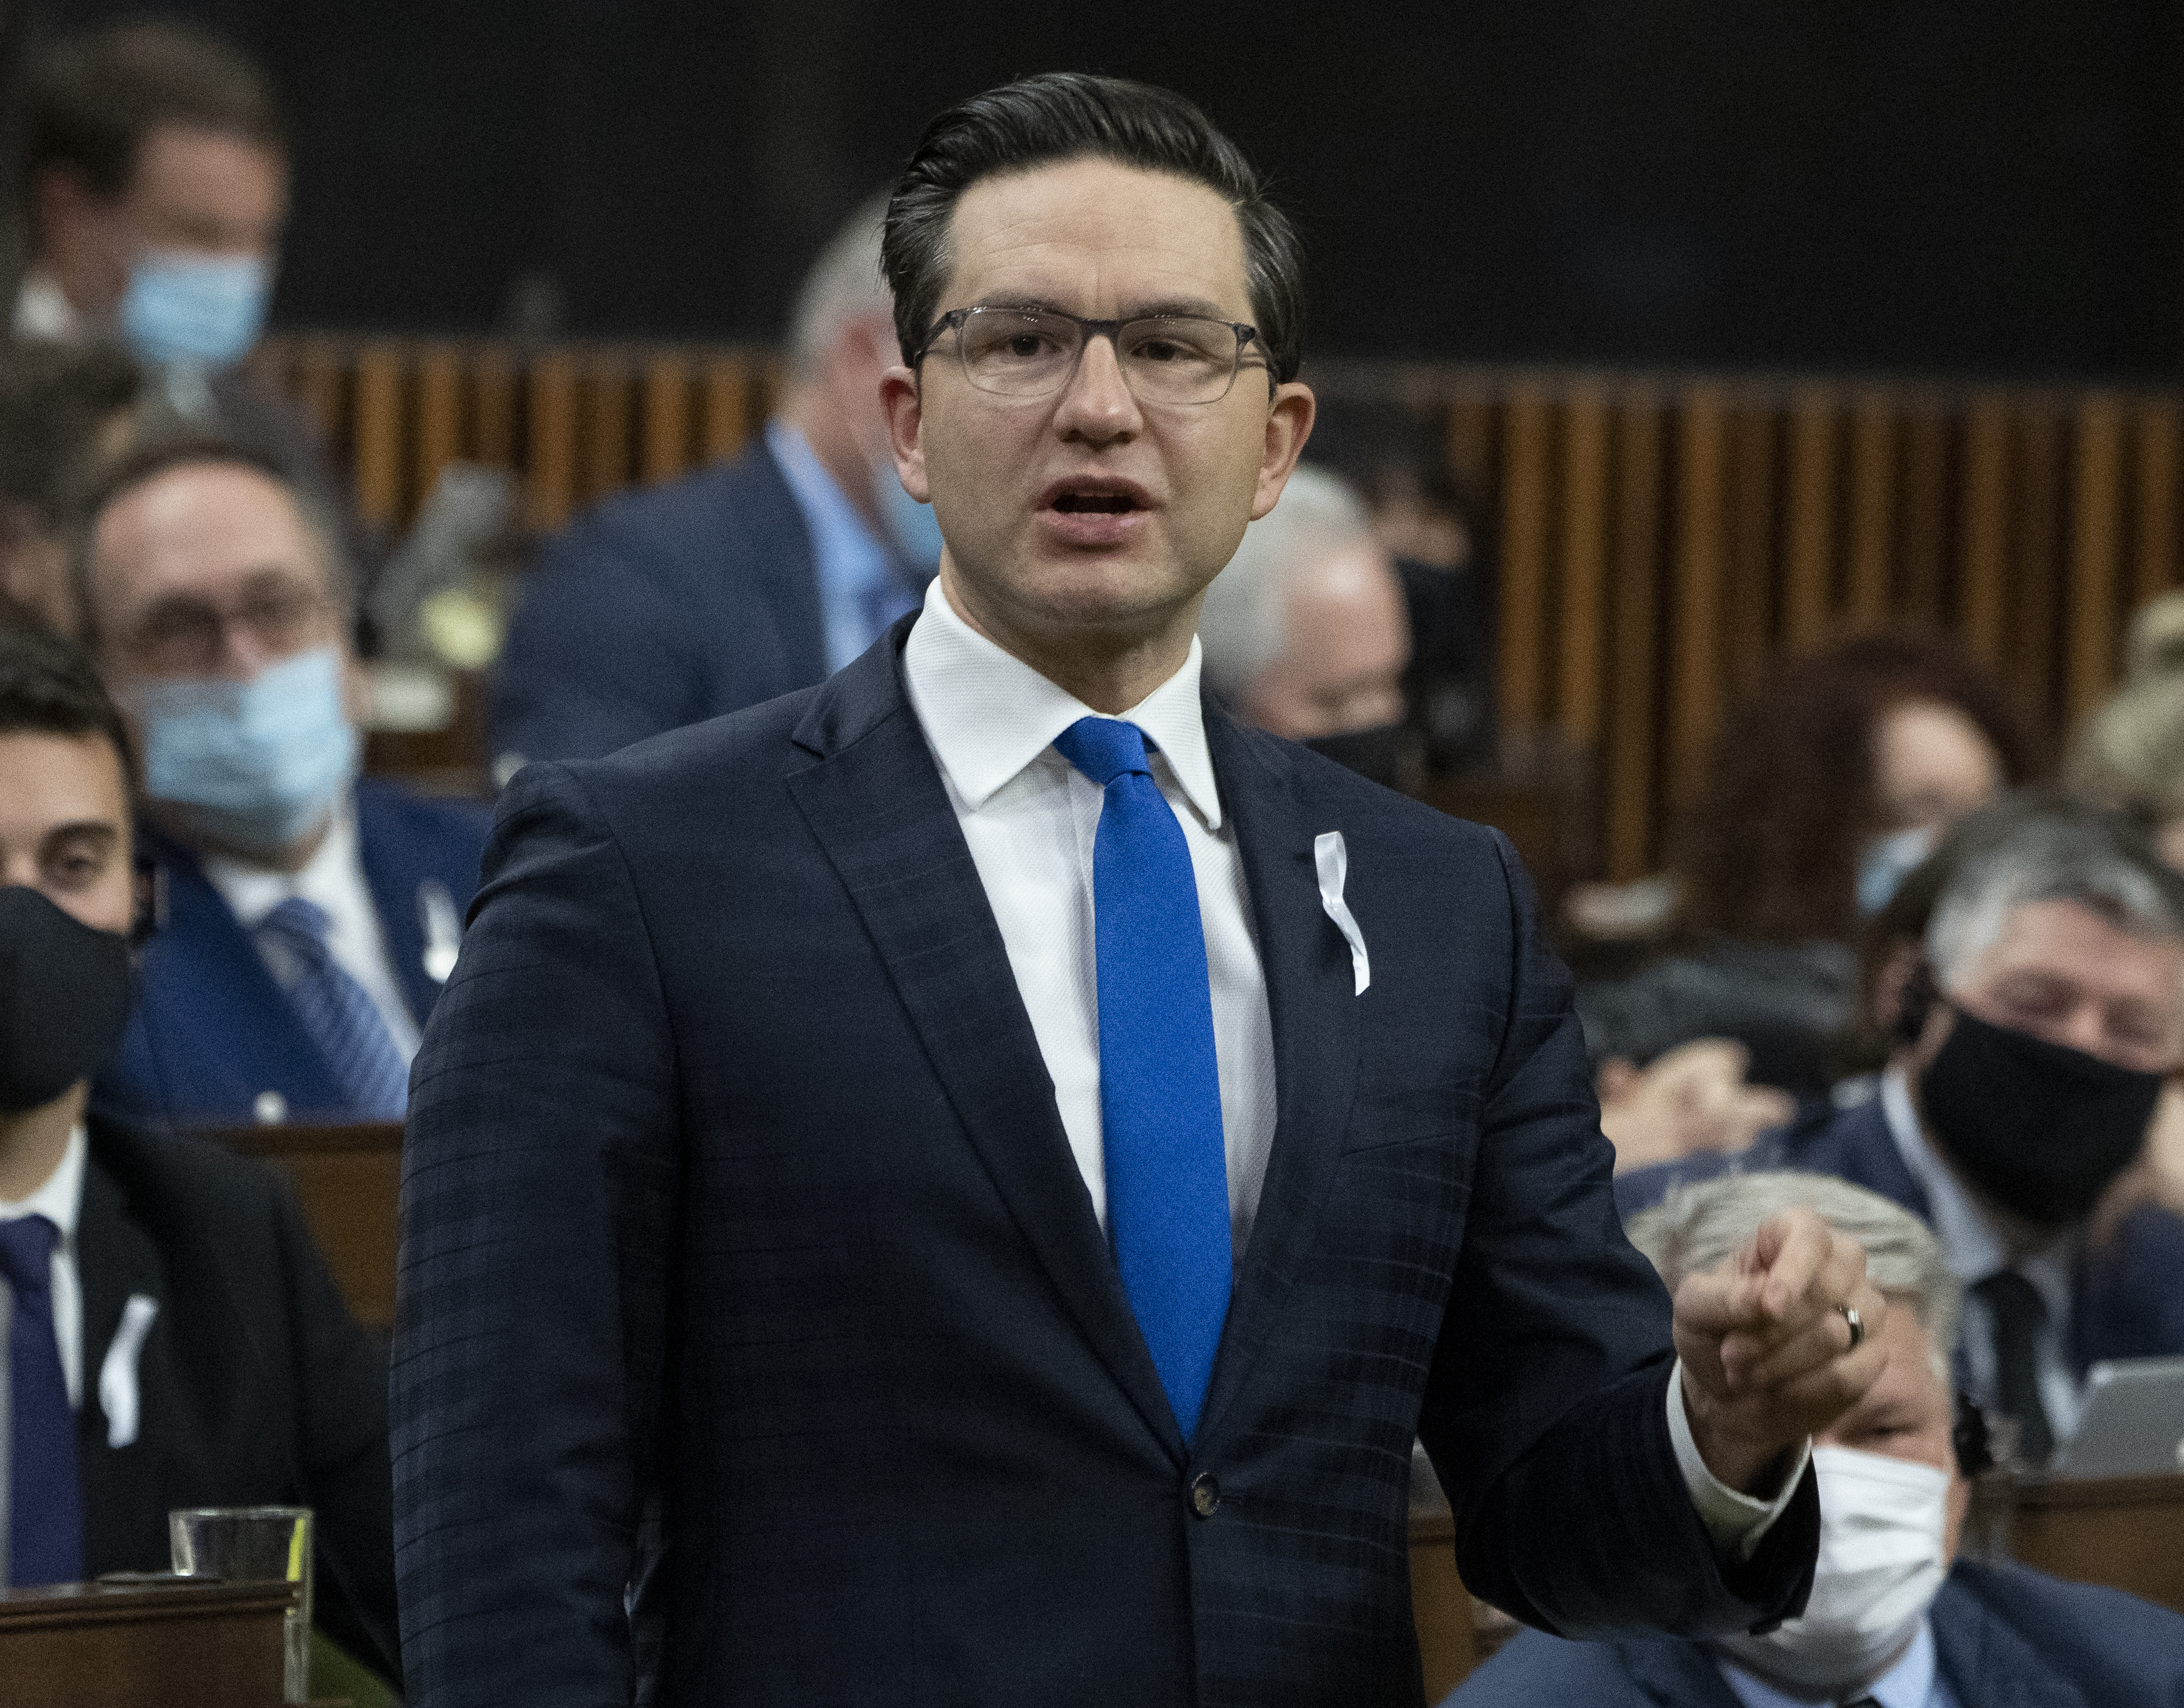 Pierre Poilievre riding the populist wave that began as a protest against  vaccine mandates - The Globe and Mail